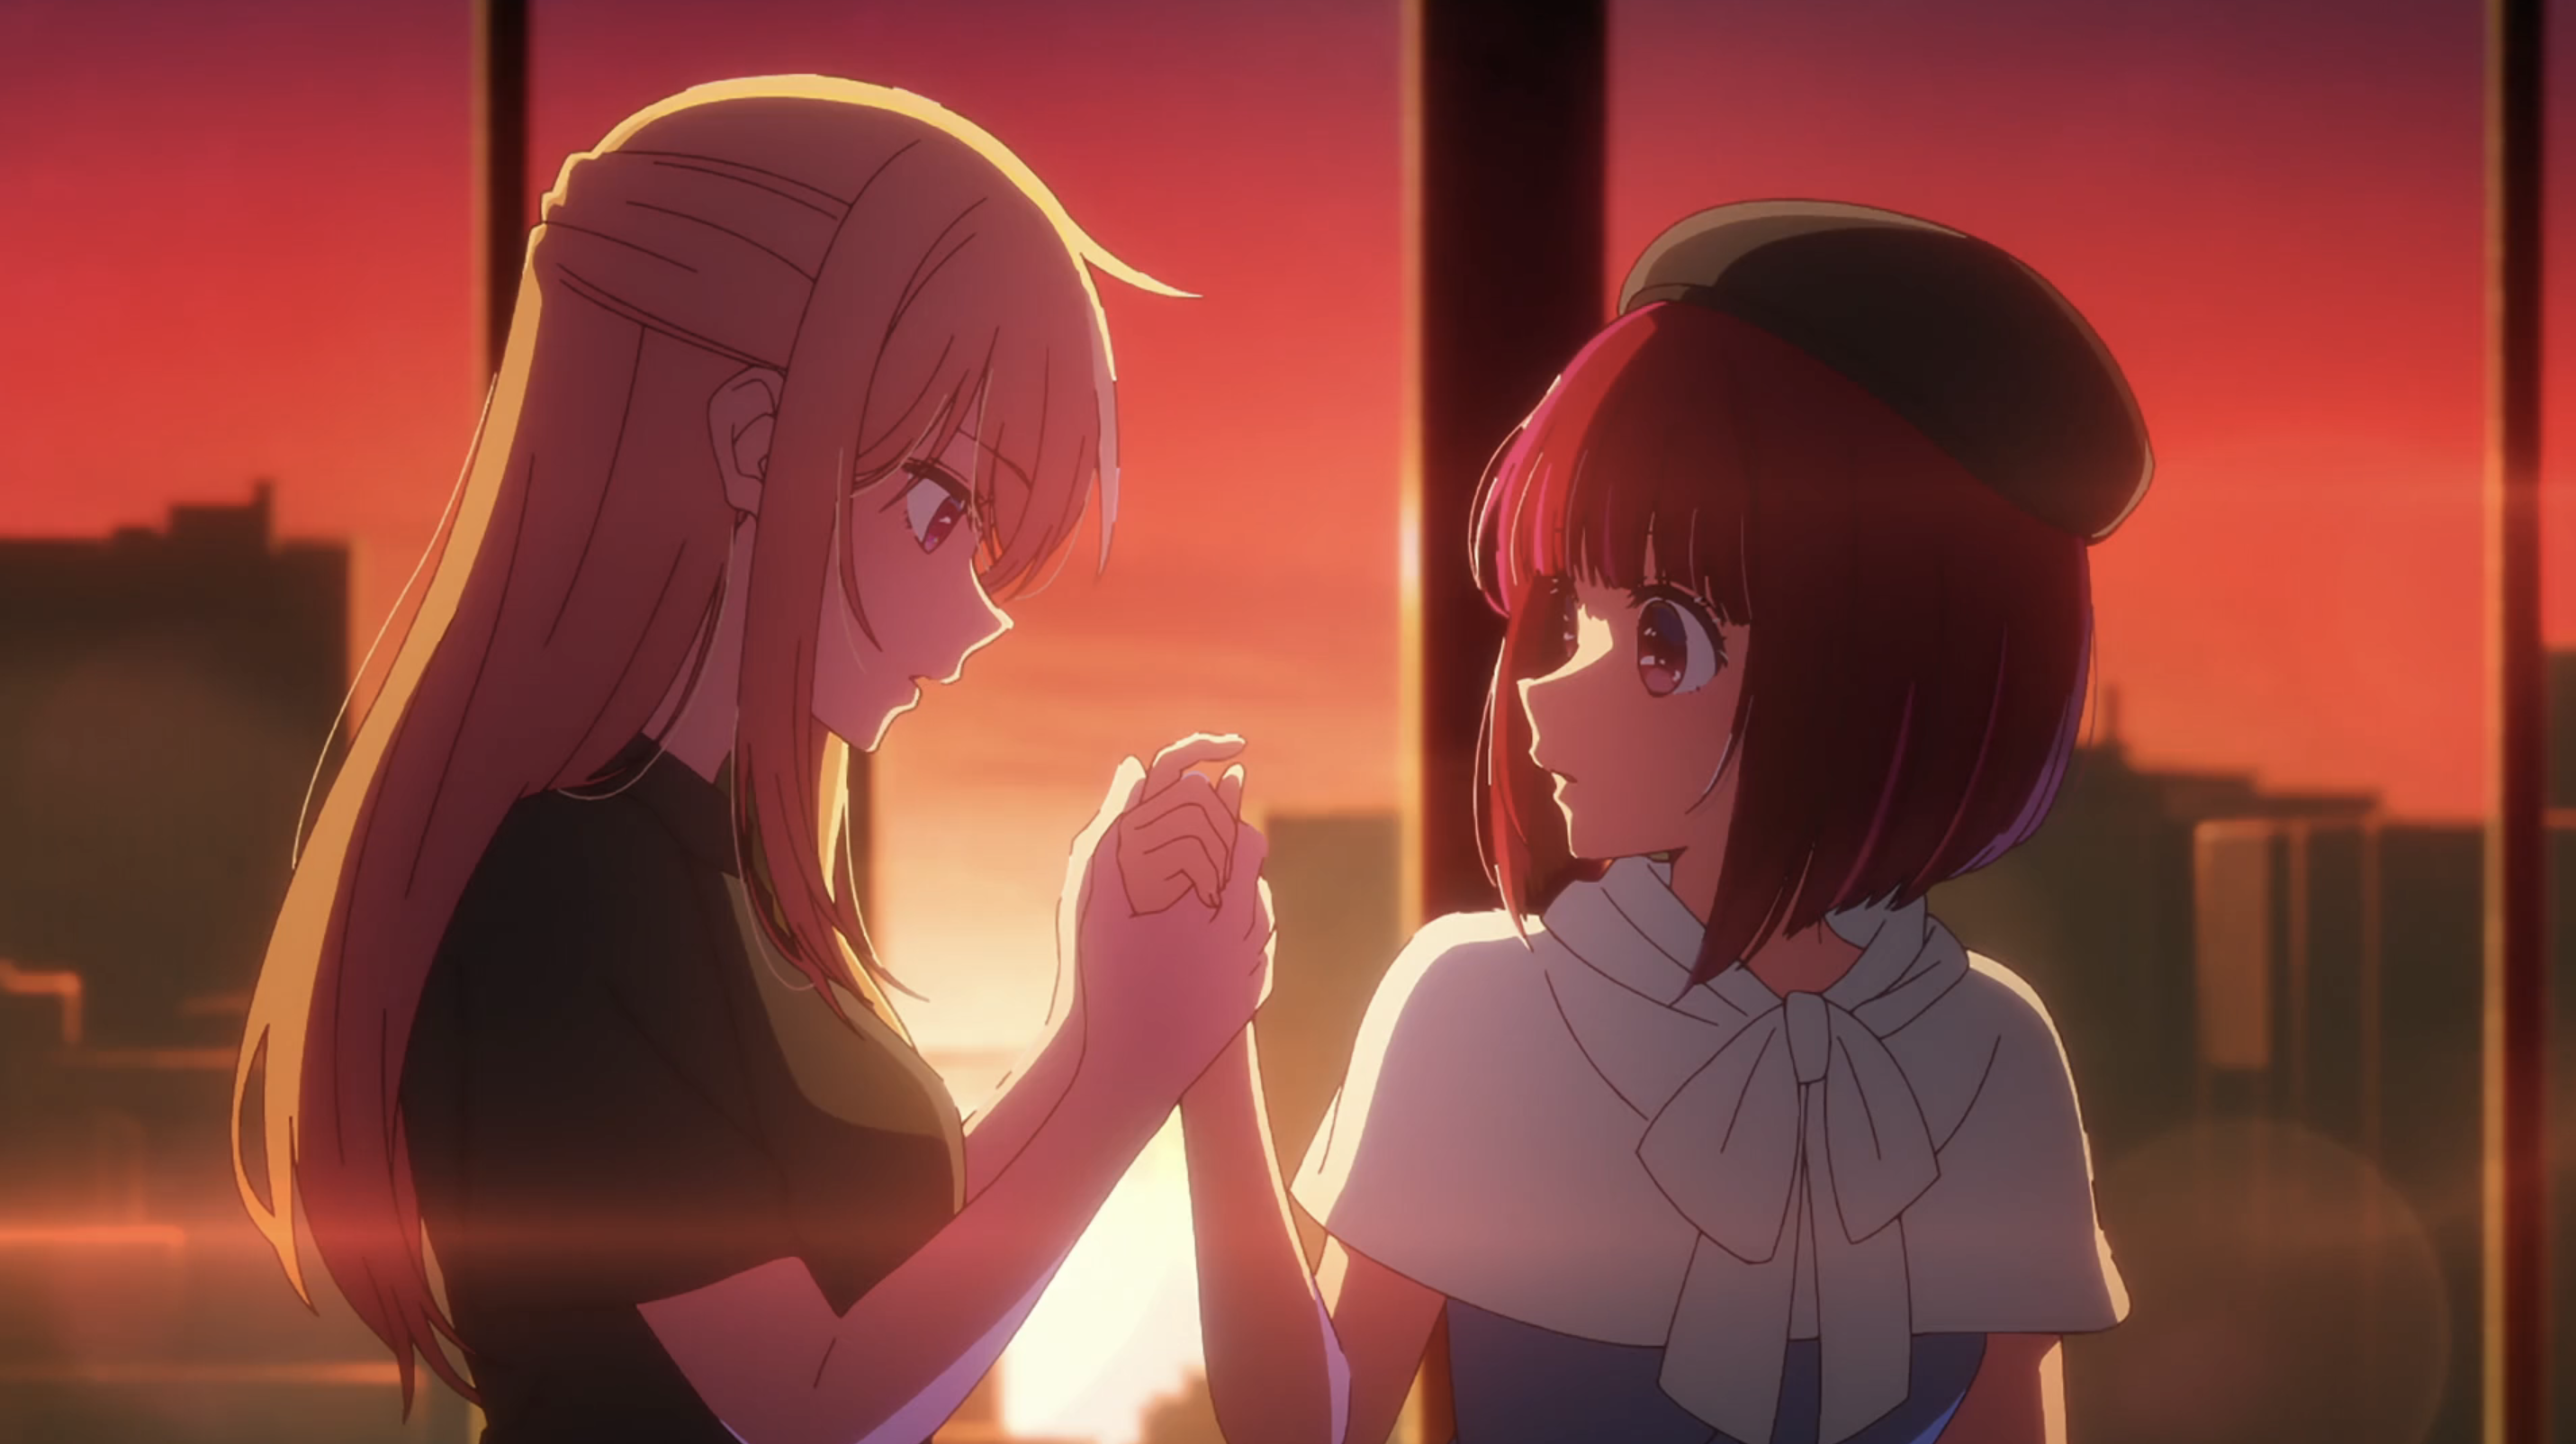 Oshi no Ko season 2 release date, cast, plot and everything you need to know